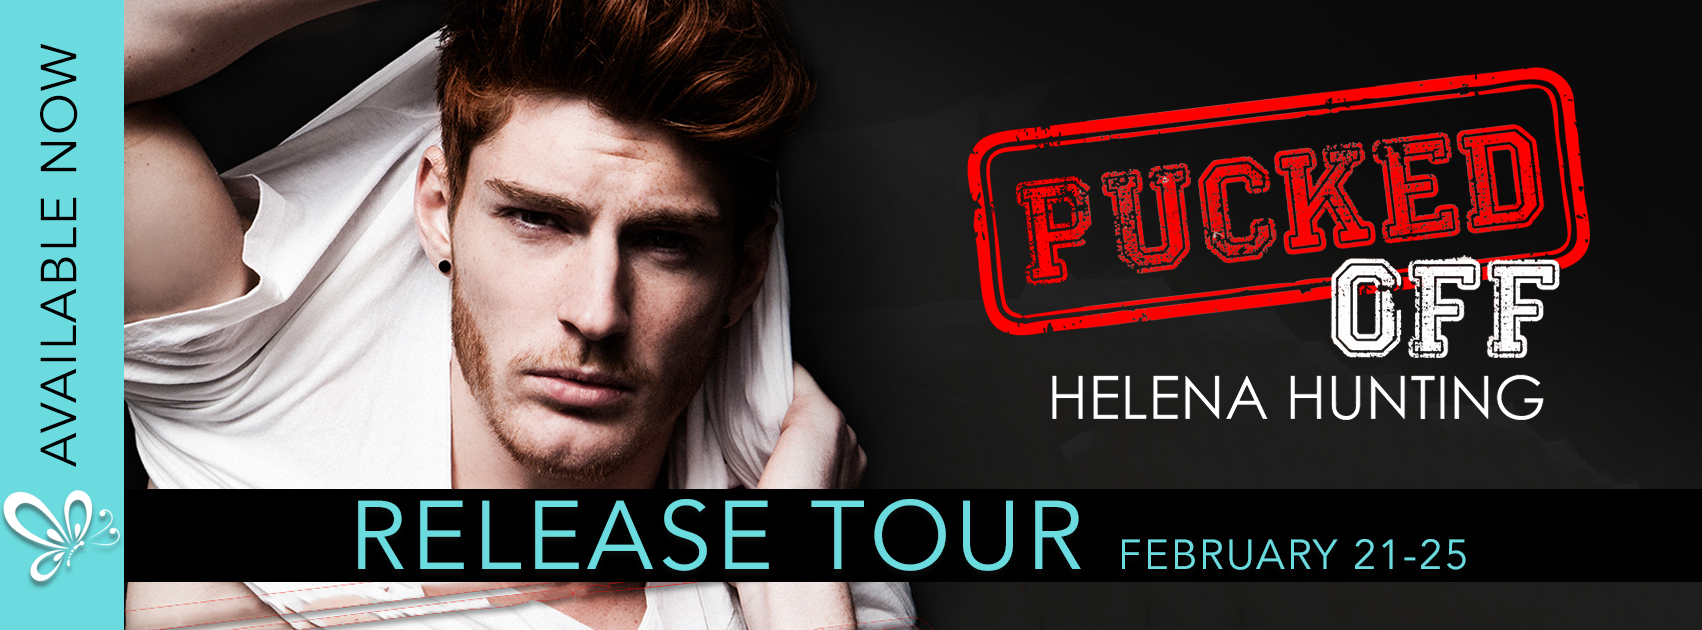 Pucked Off by Helena Hunting Blog Tour #Review